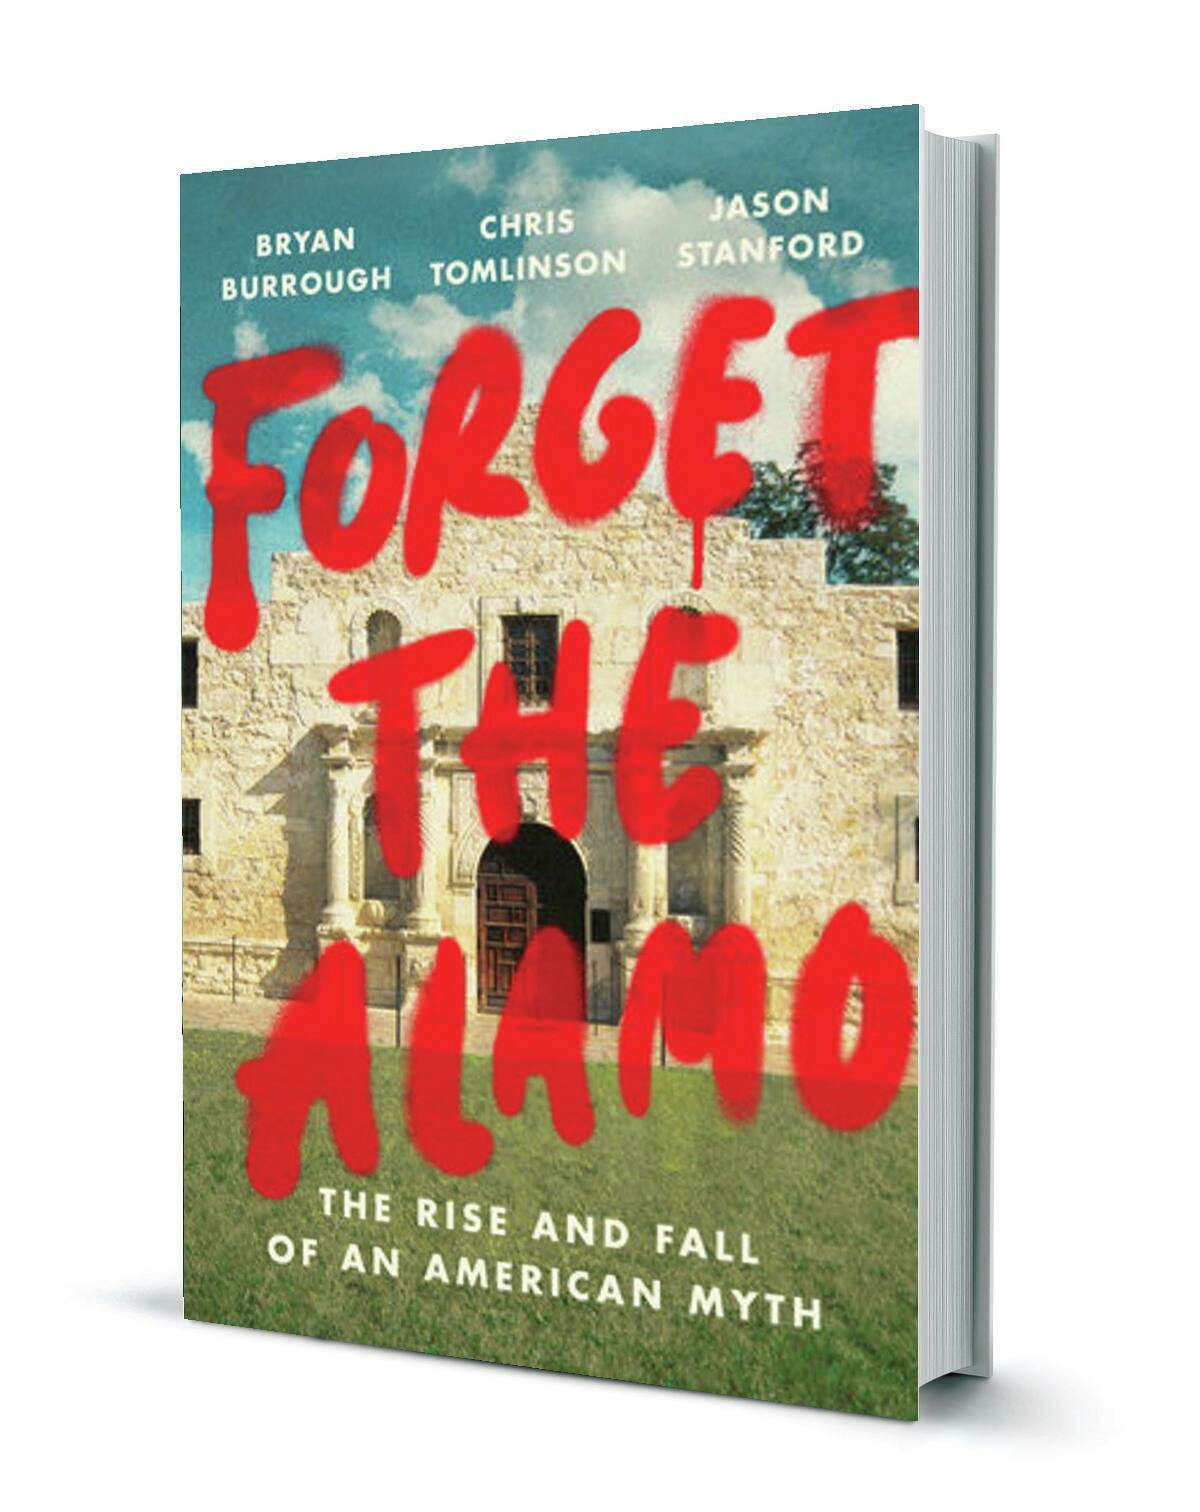 Writers of "Forget the Alamo," the book that become a subject of ire for GOP state leaders, are planning a townhall forum taking place in San Antonio this week. 